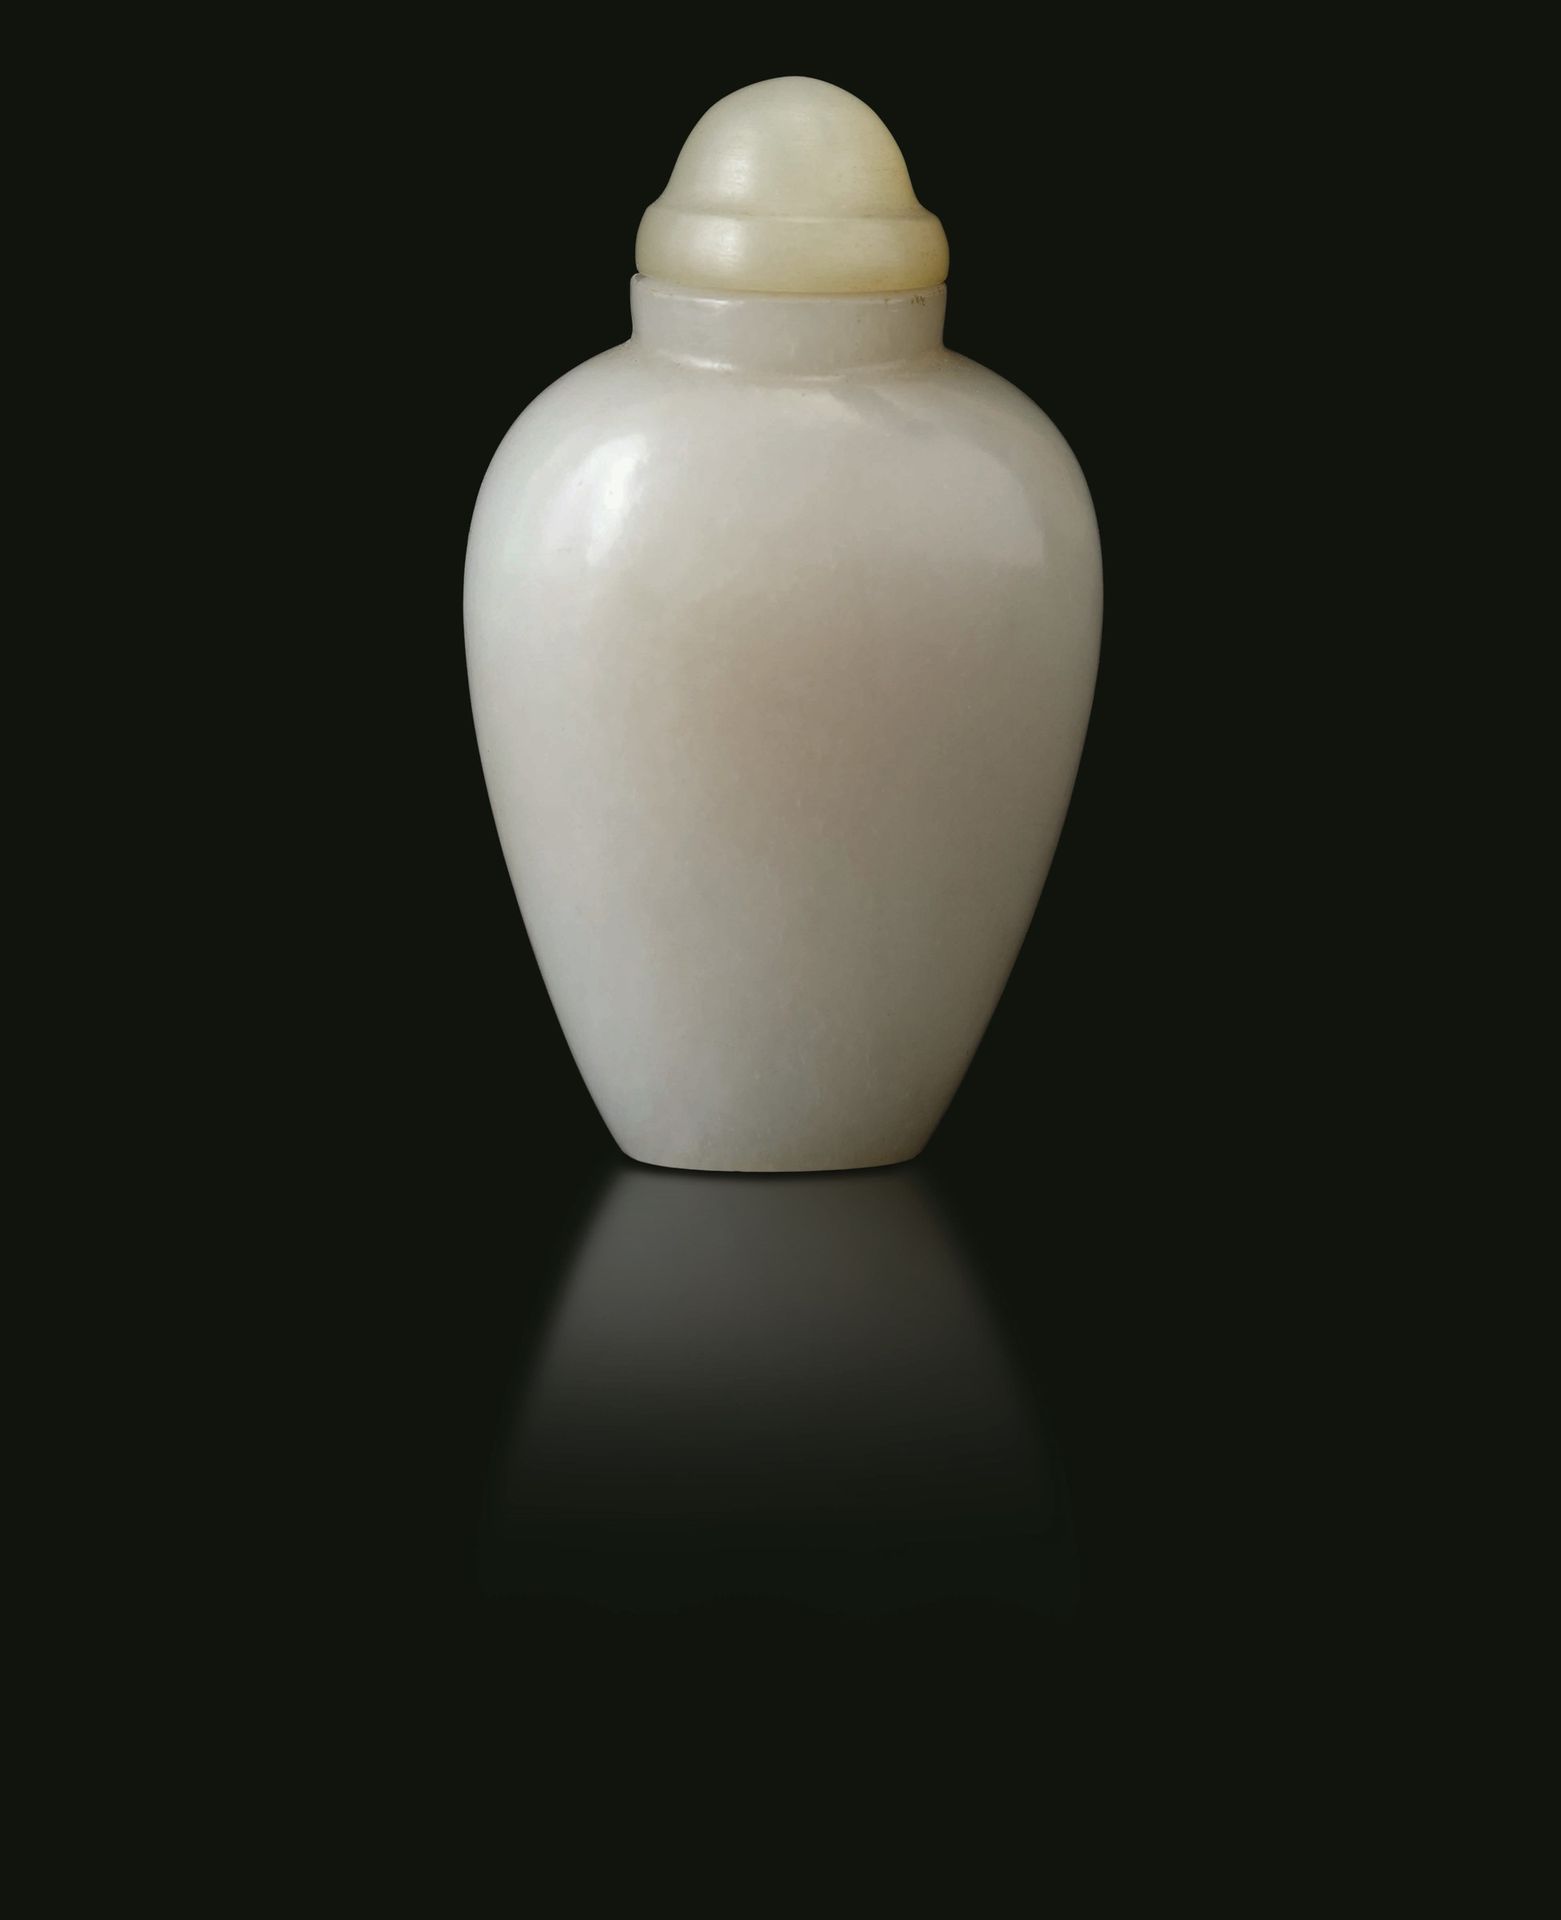 A white jade snuff bottle, China, Qing Dynasty 1800s. H 6,5 cm